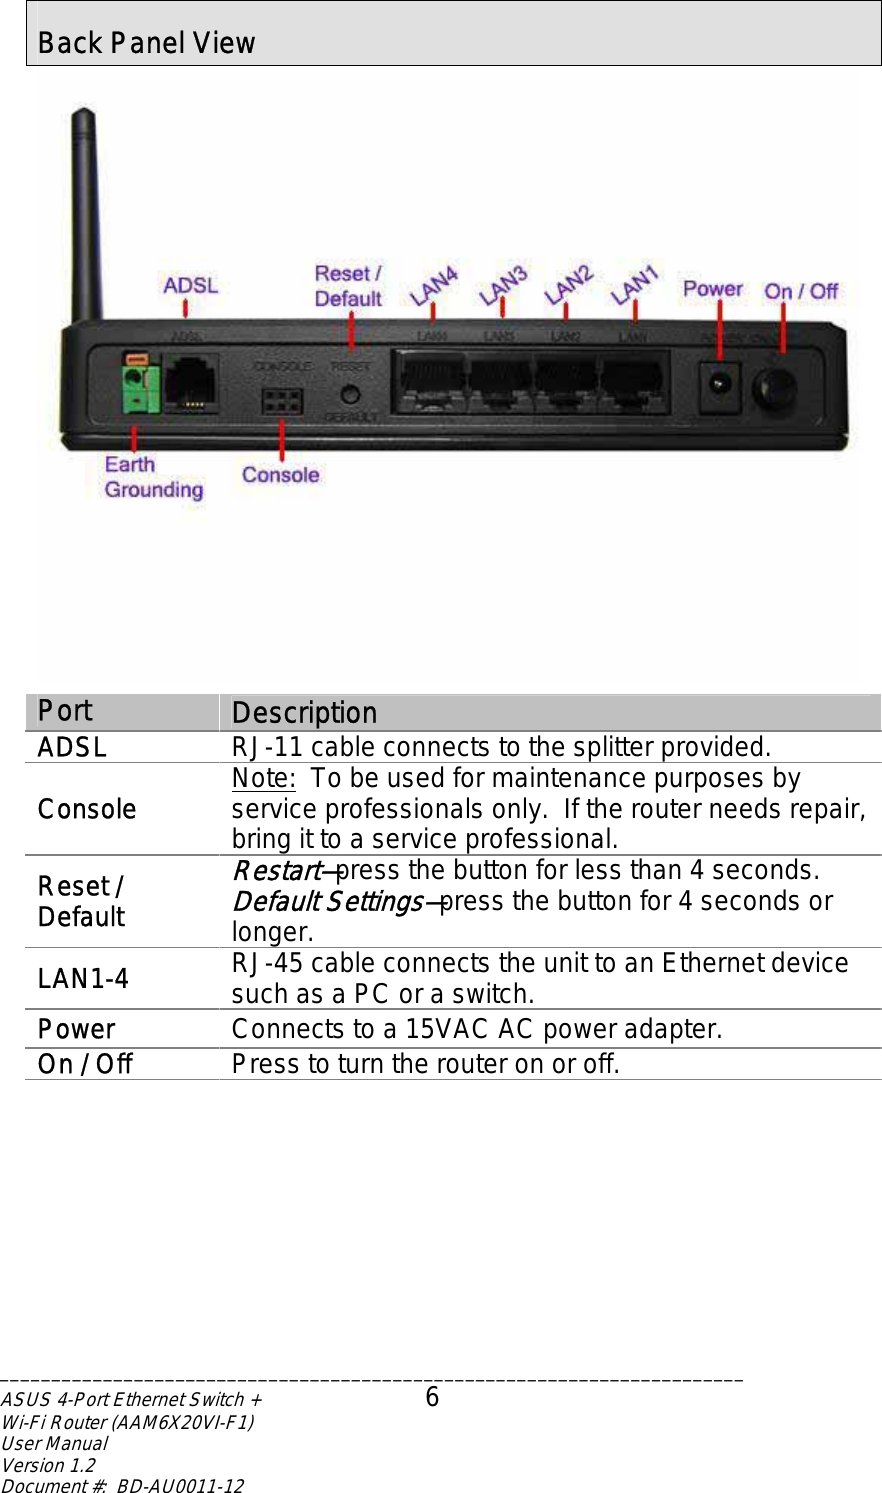  Back Panel View  Port  Description ADSL  RJ-11 cable connects to the splitter provided. Console  Note:  To be used for maintenance purposes by service professionals only.  If the router needs repair, bring it to a service professional. Reset / Default Restart—press the button for less than 4 seconds. Default Settings—press the button for 4 seconds or longer. LAN1-4  RJ-45 cable connects the unit to an Ethernet device such as a PC or a switch. Power  Connects to a 15VAC AC power adapter. On / Off  Press to turn the router on or off.   ________________________________________________________________________ASUS 4-Port Ethernet Switch +  6 Wi-Fi Router (AAM6X20VI-F1) User Manual                                                                         Version 1.2 Document #:  BD-AU0011-12  